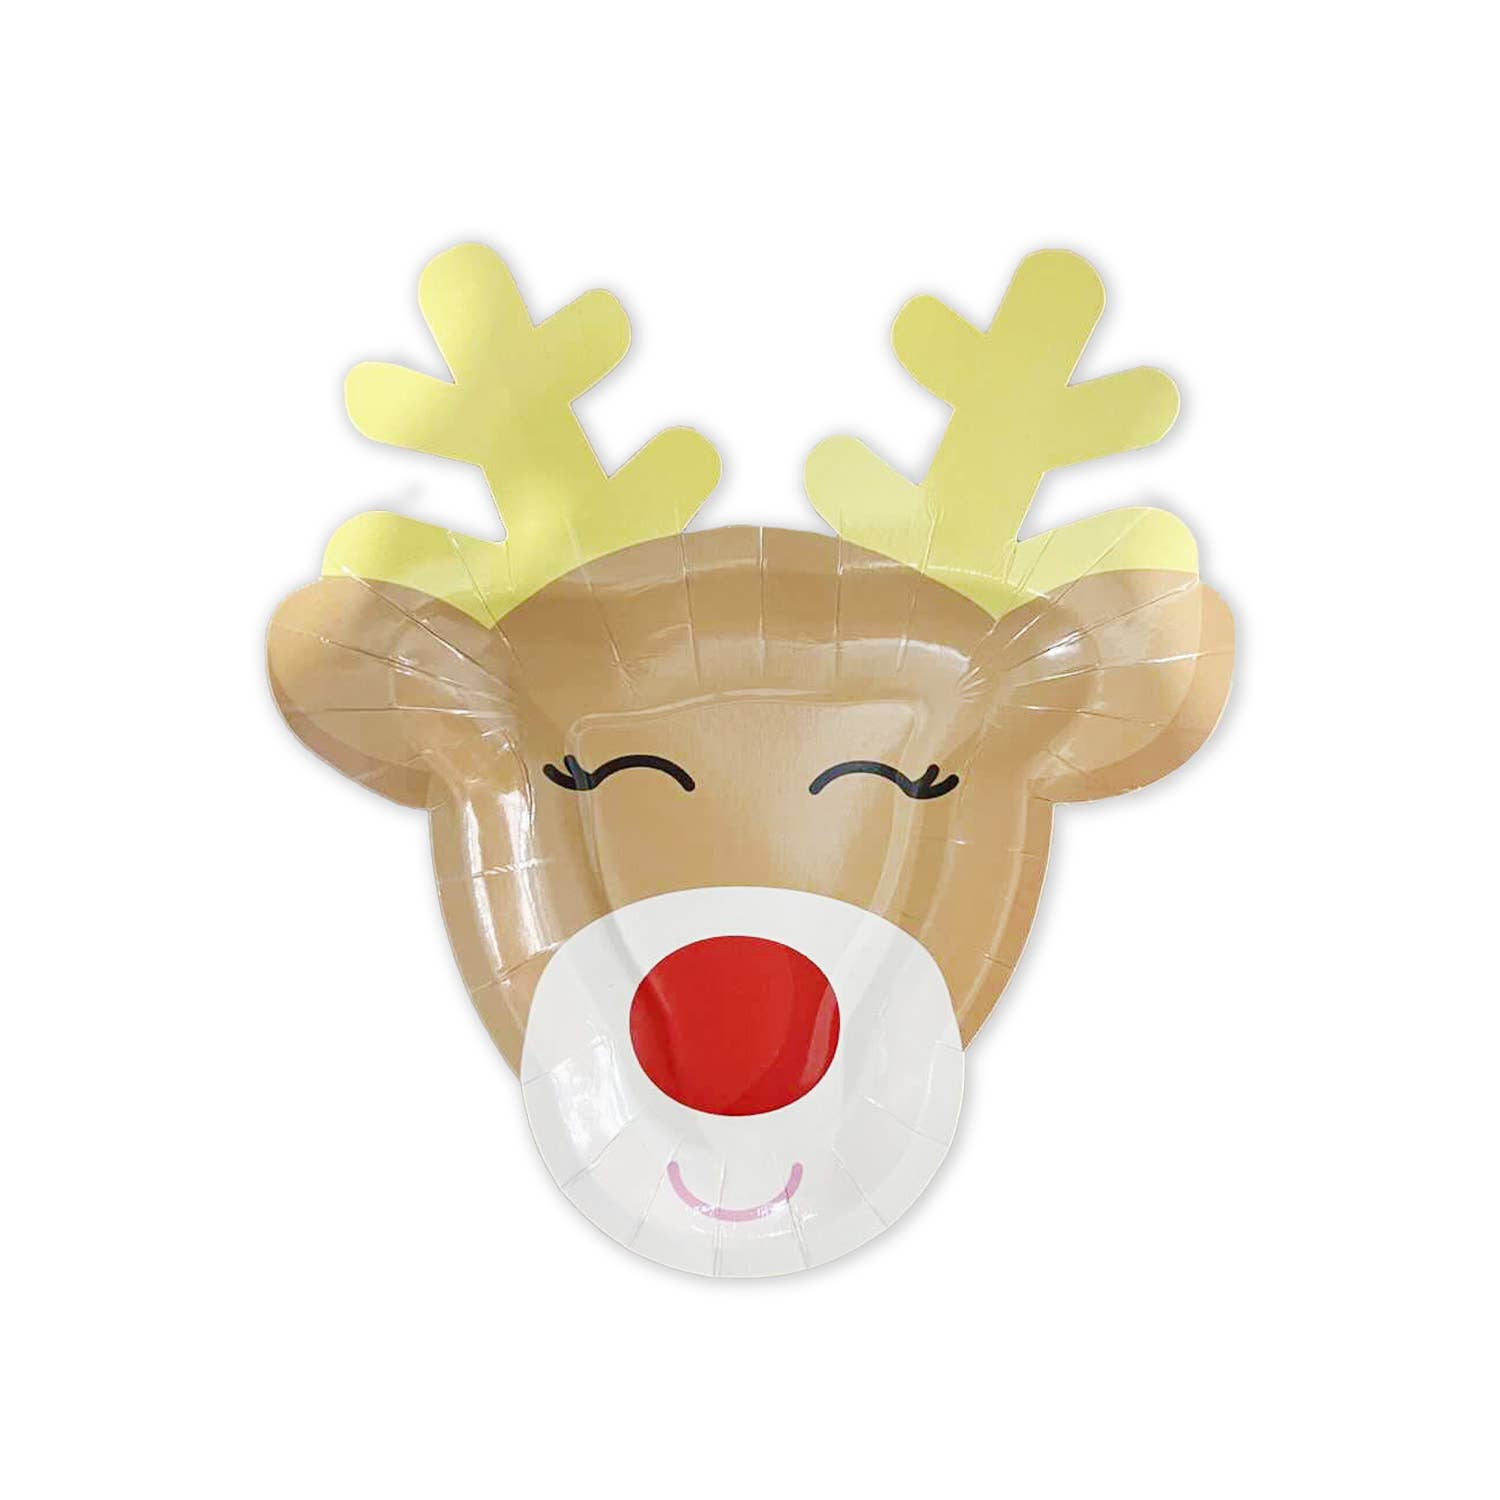 Rudolph the Reindeer Shaped Plates (Set of 8)